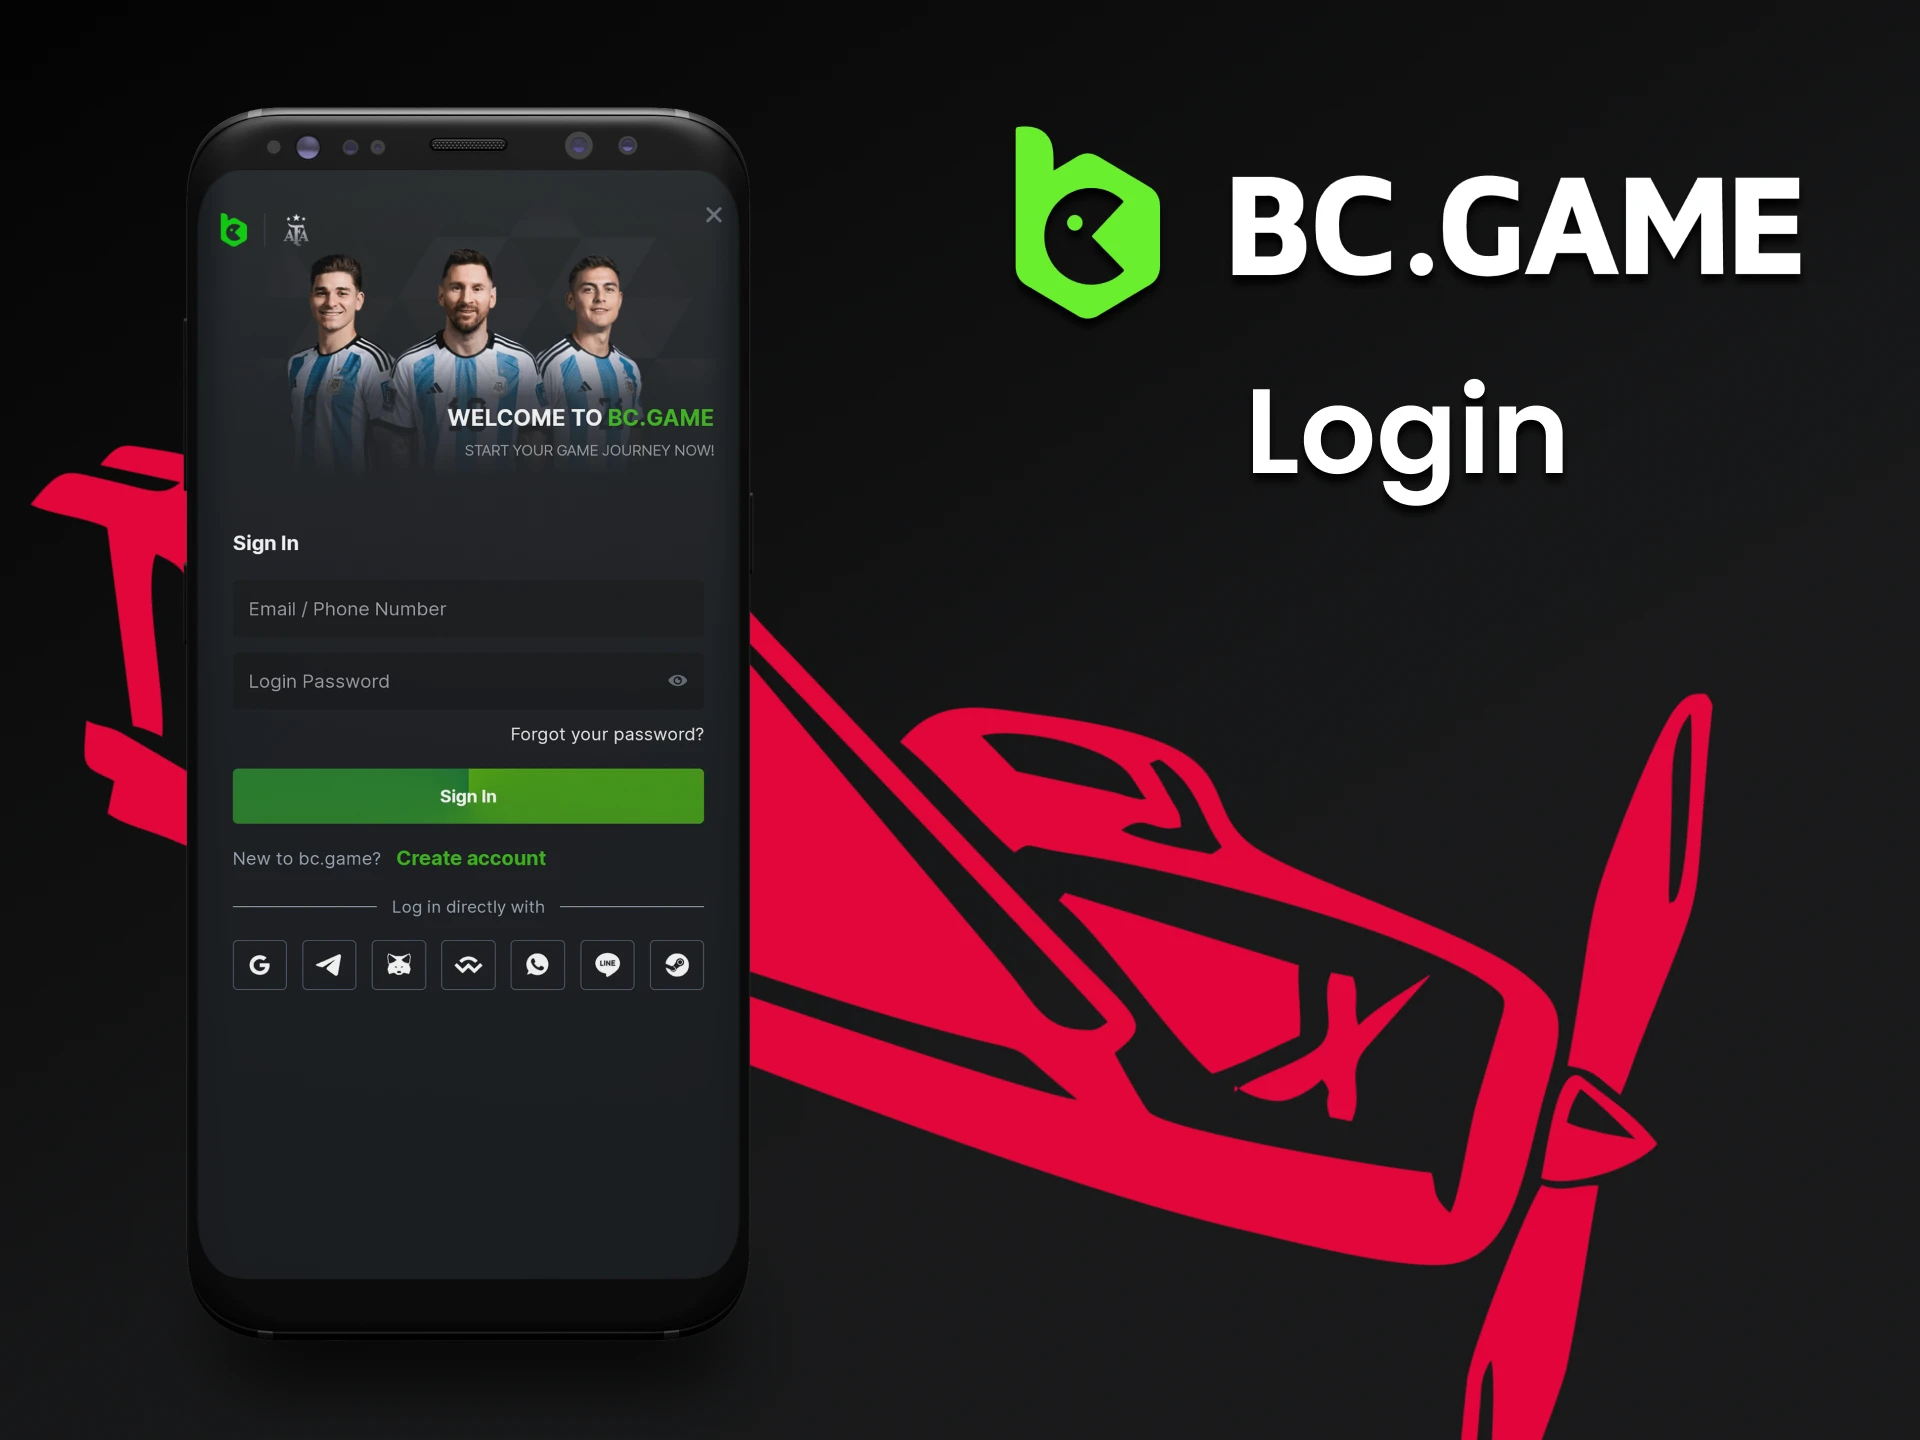 Log in to your personal account through the BCGame app and play Aviator.